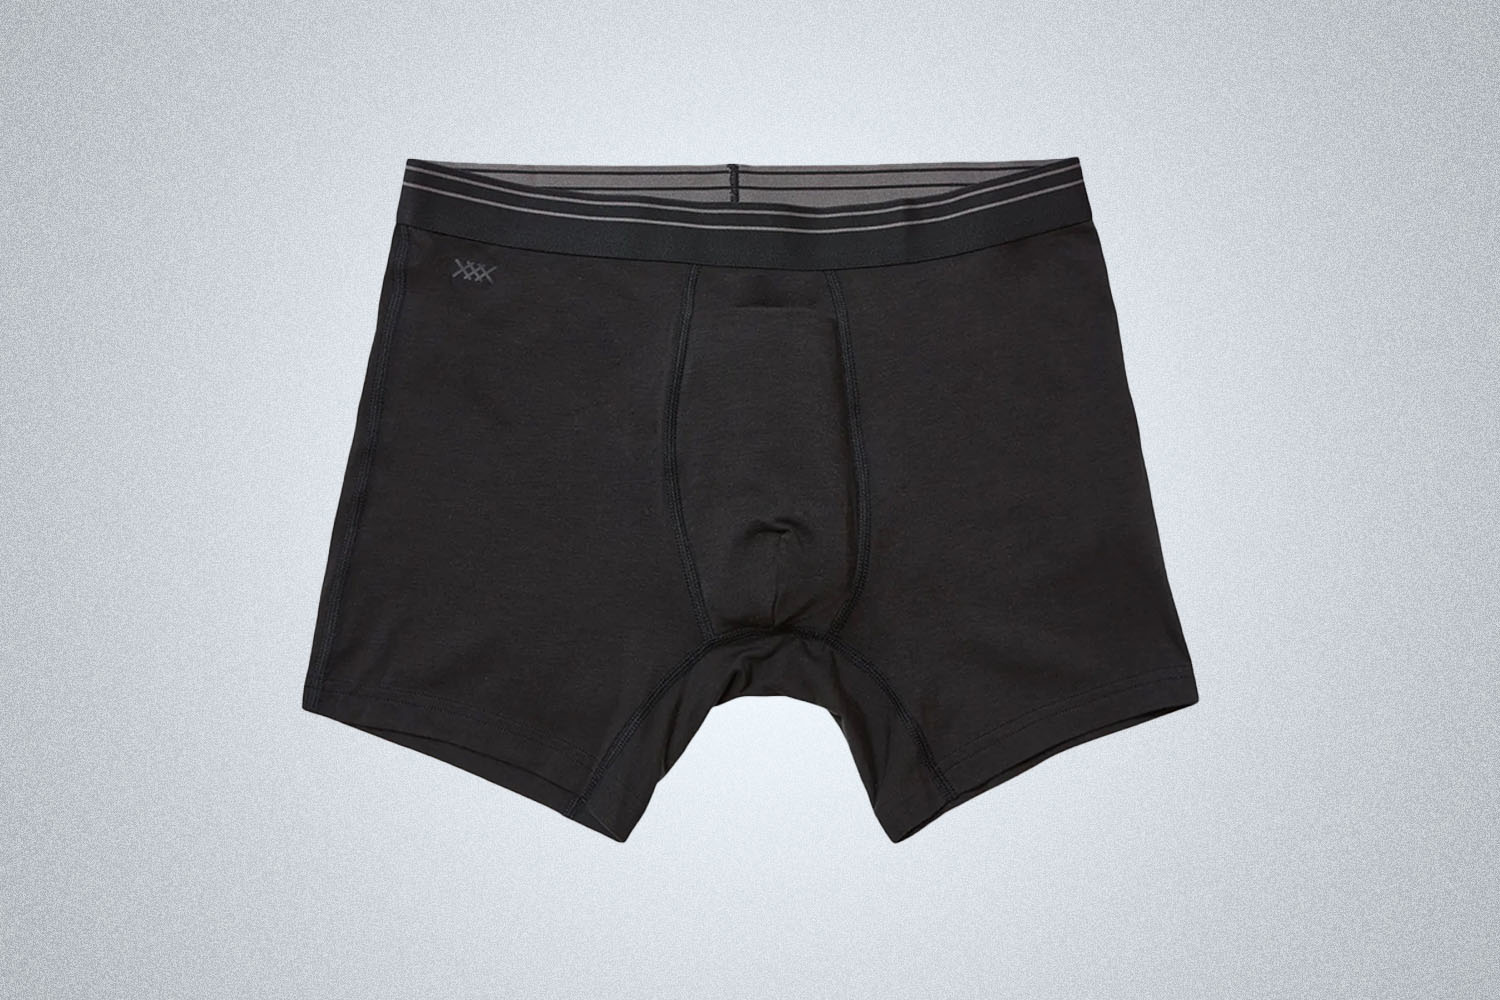 a pair of black rhone underwear on a gray background